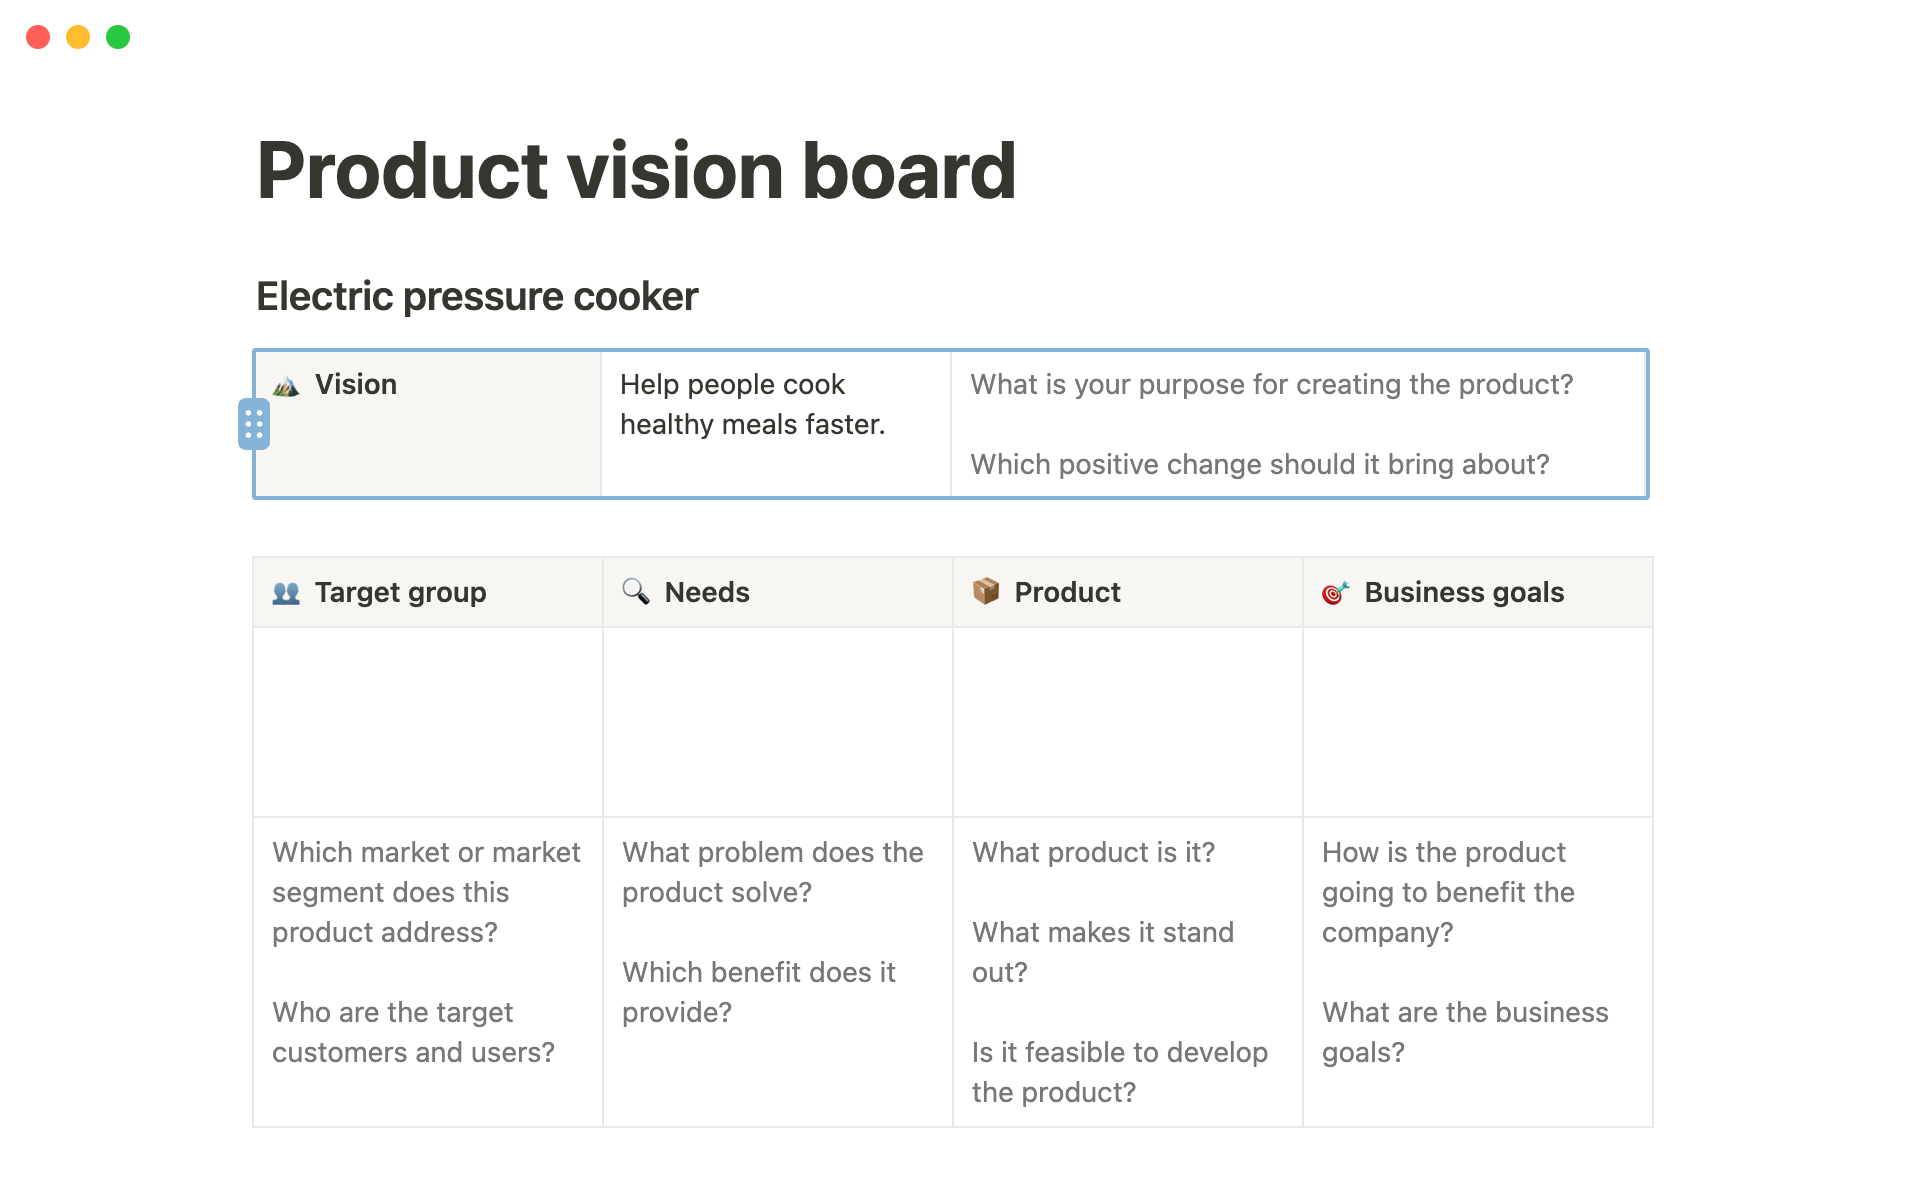 Add your product vision to the board.